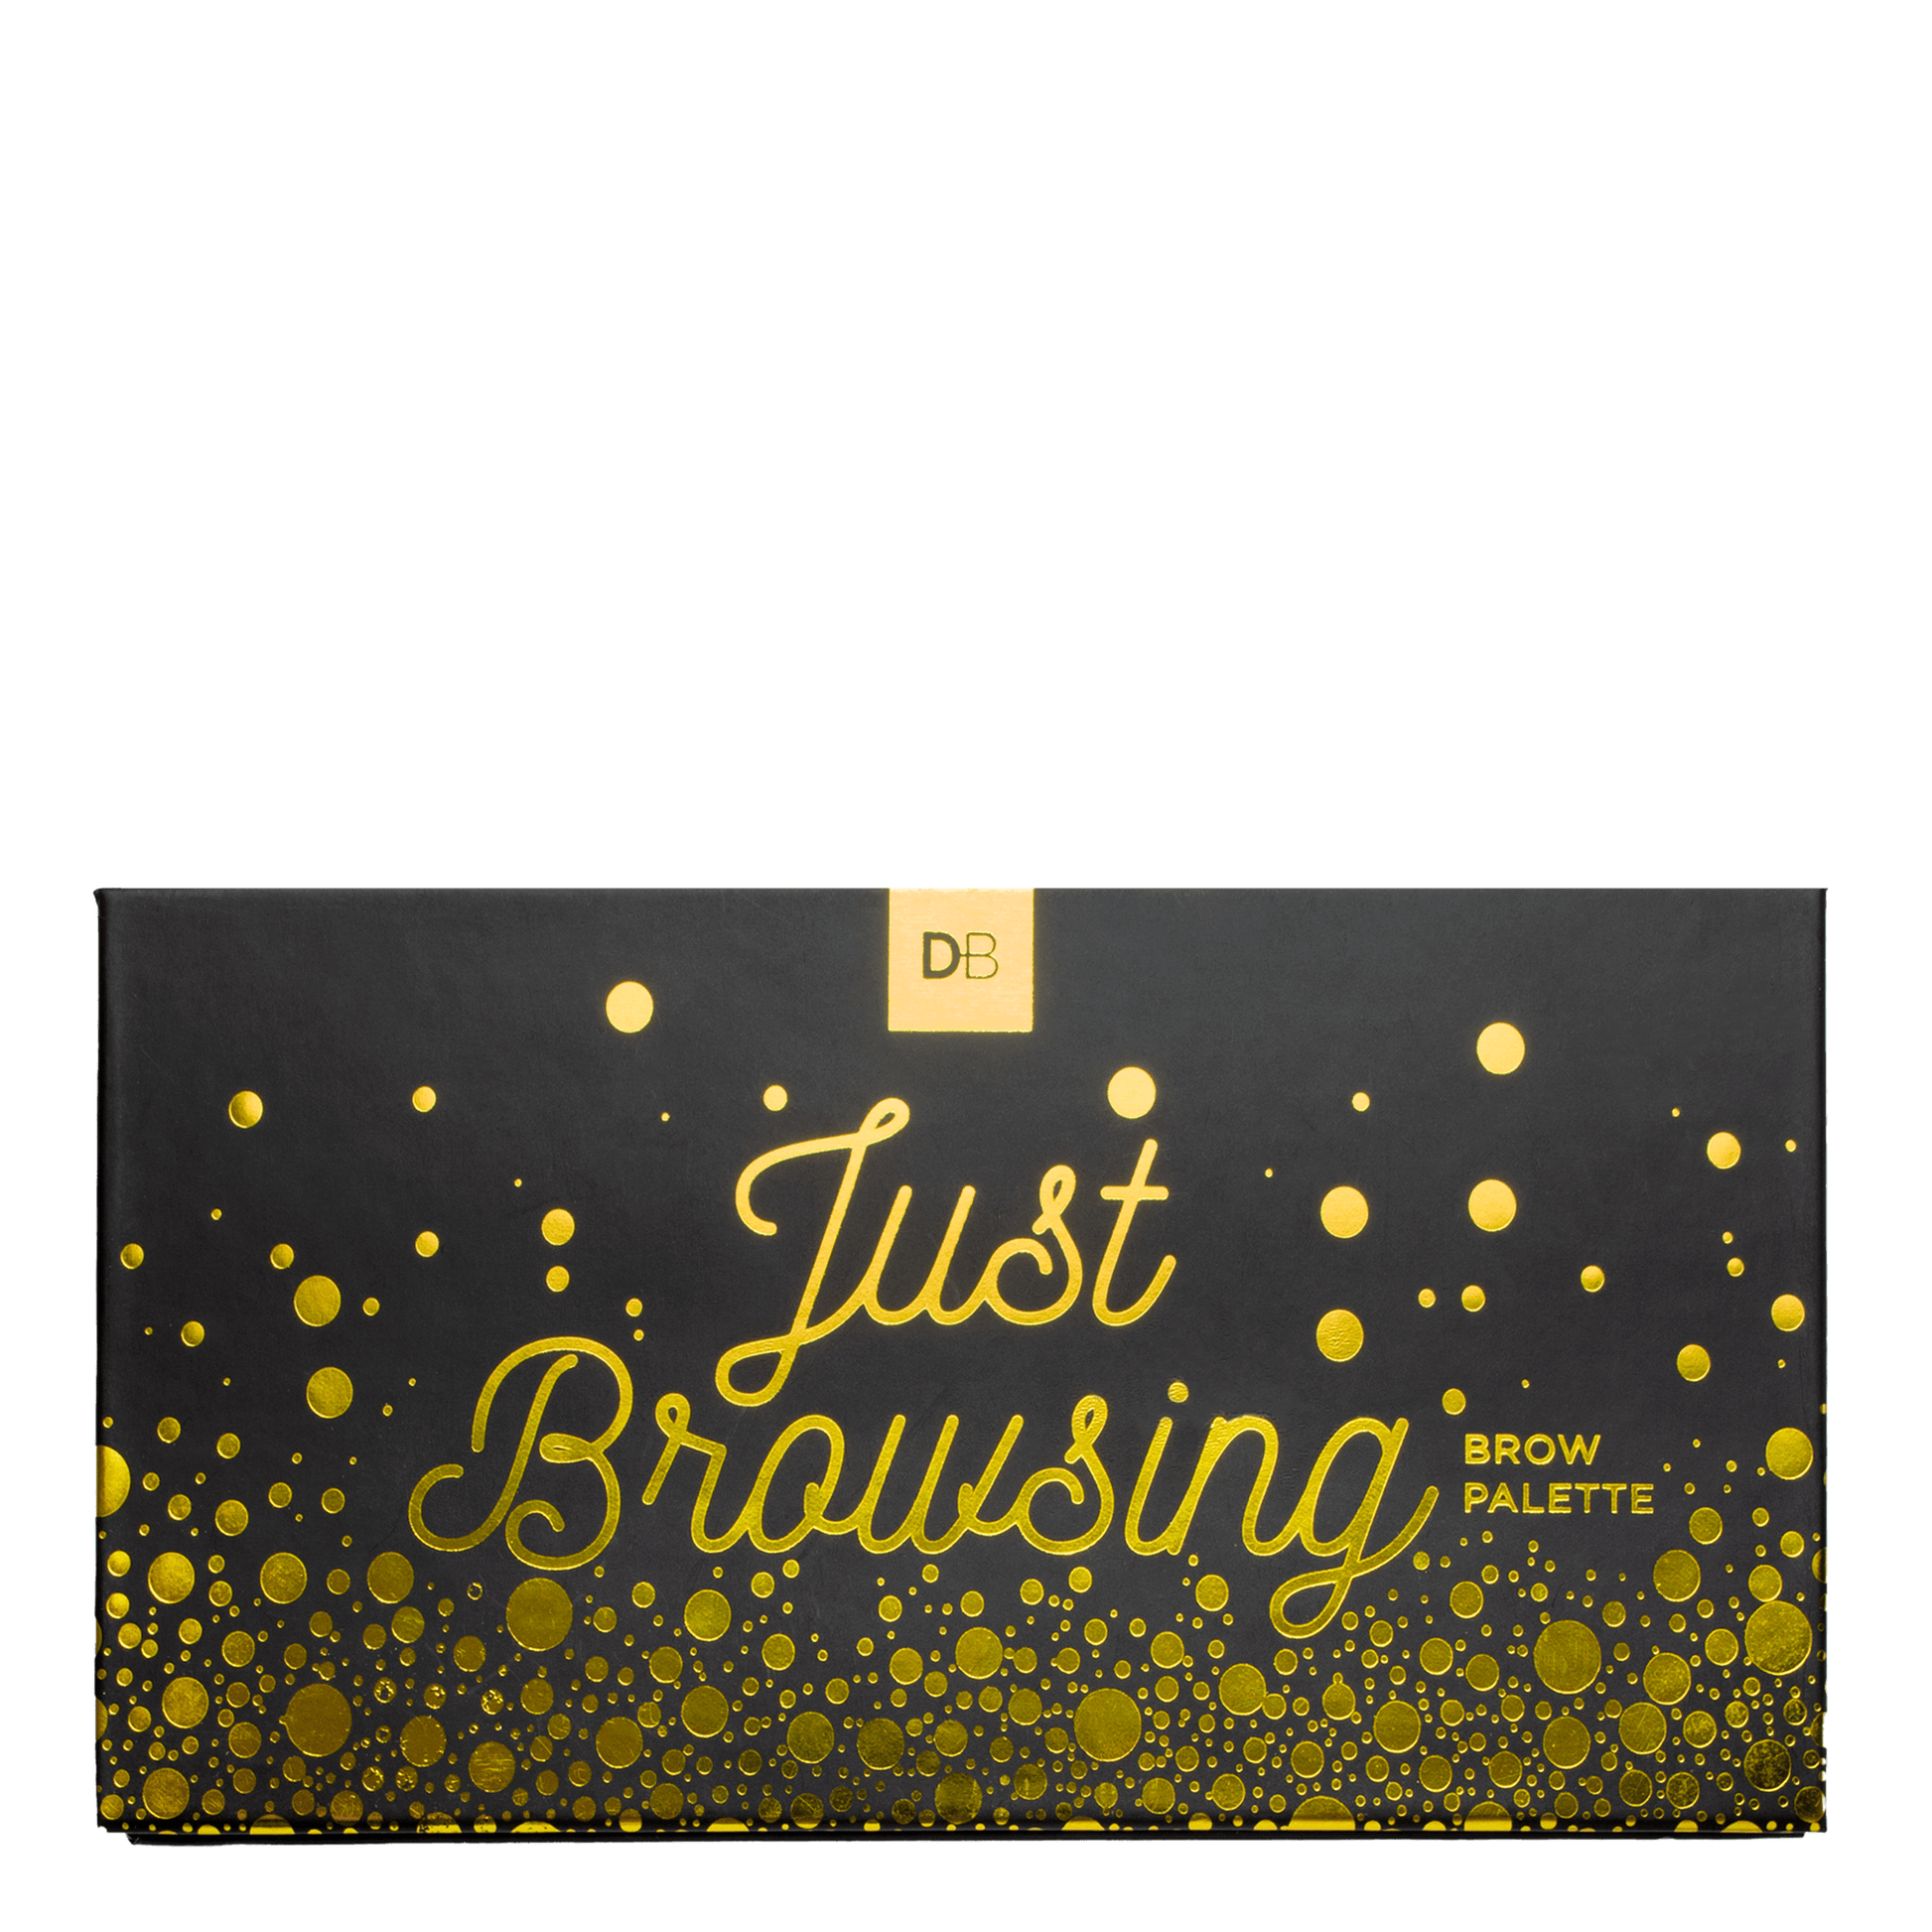 Just Browsing Brow Palette | DB Cosmetics | 01